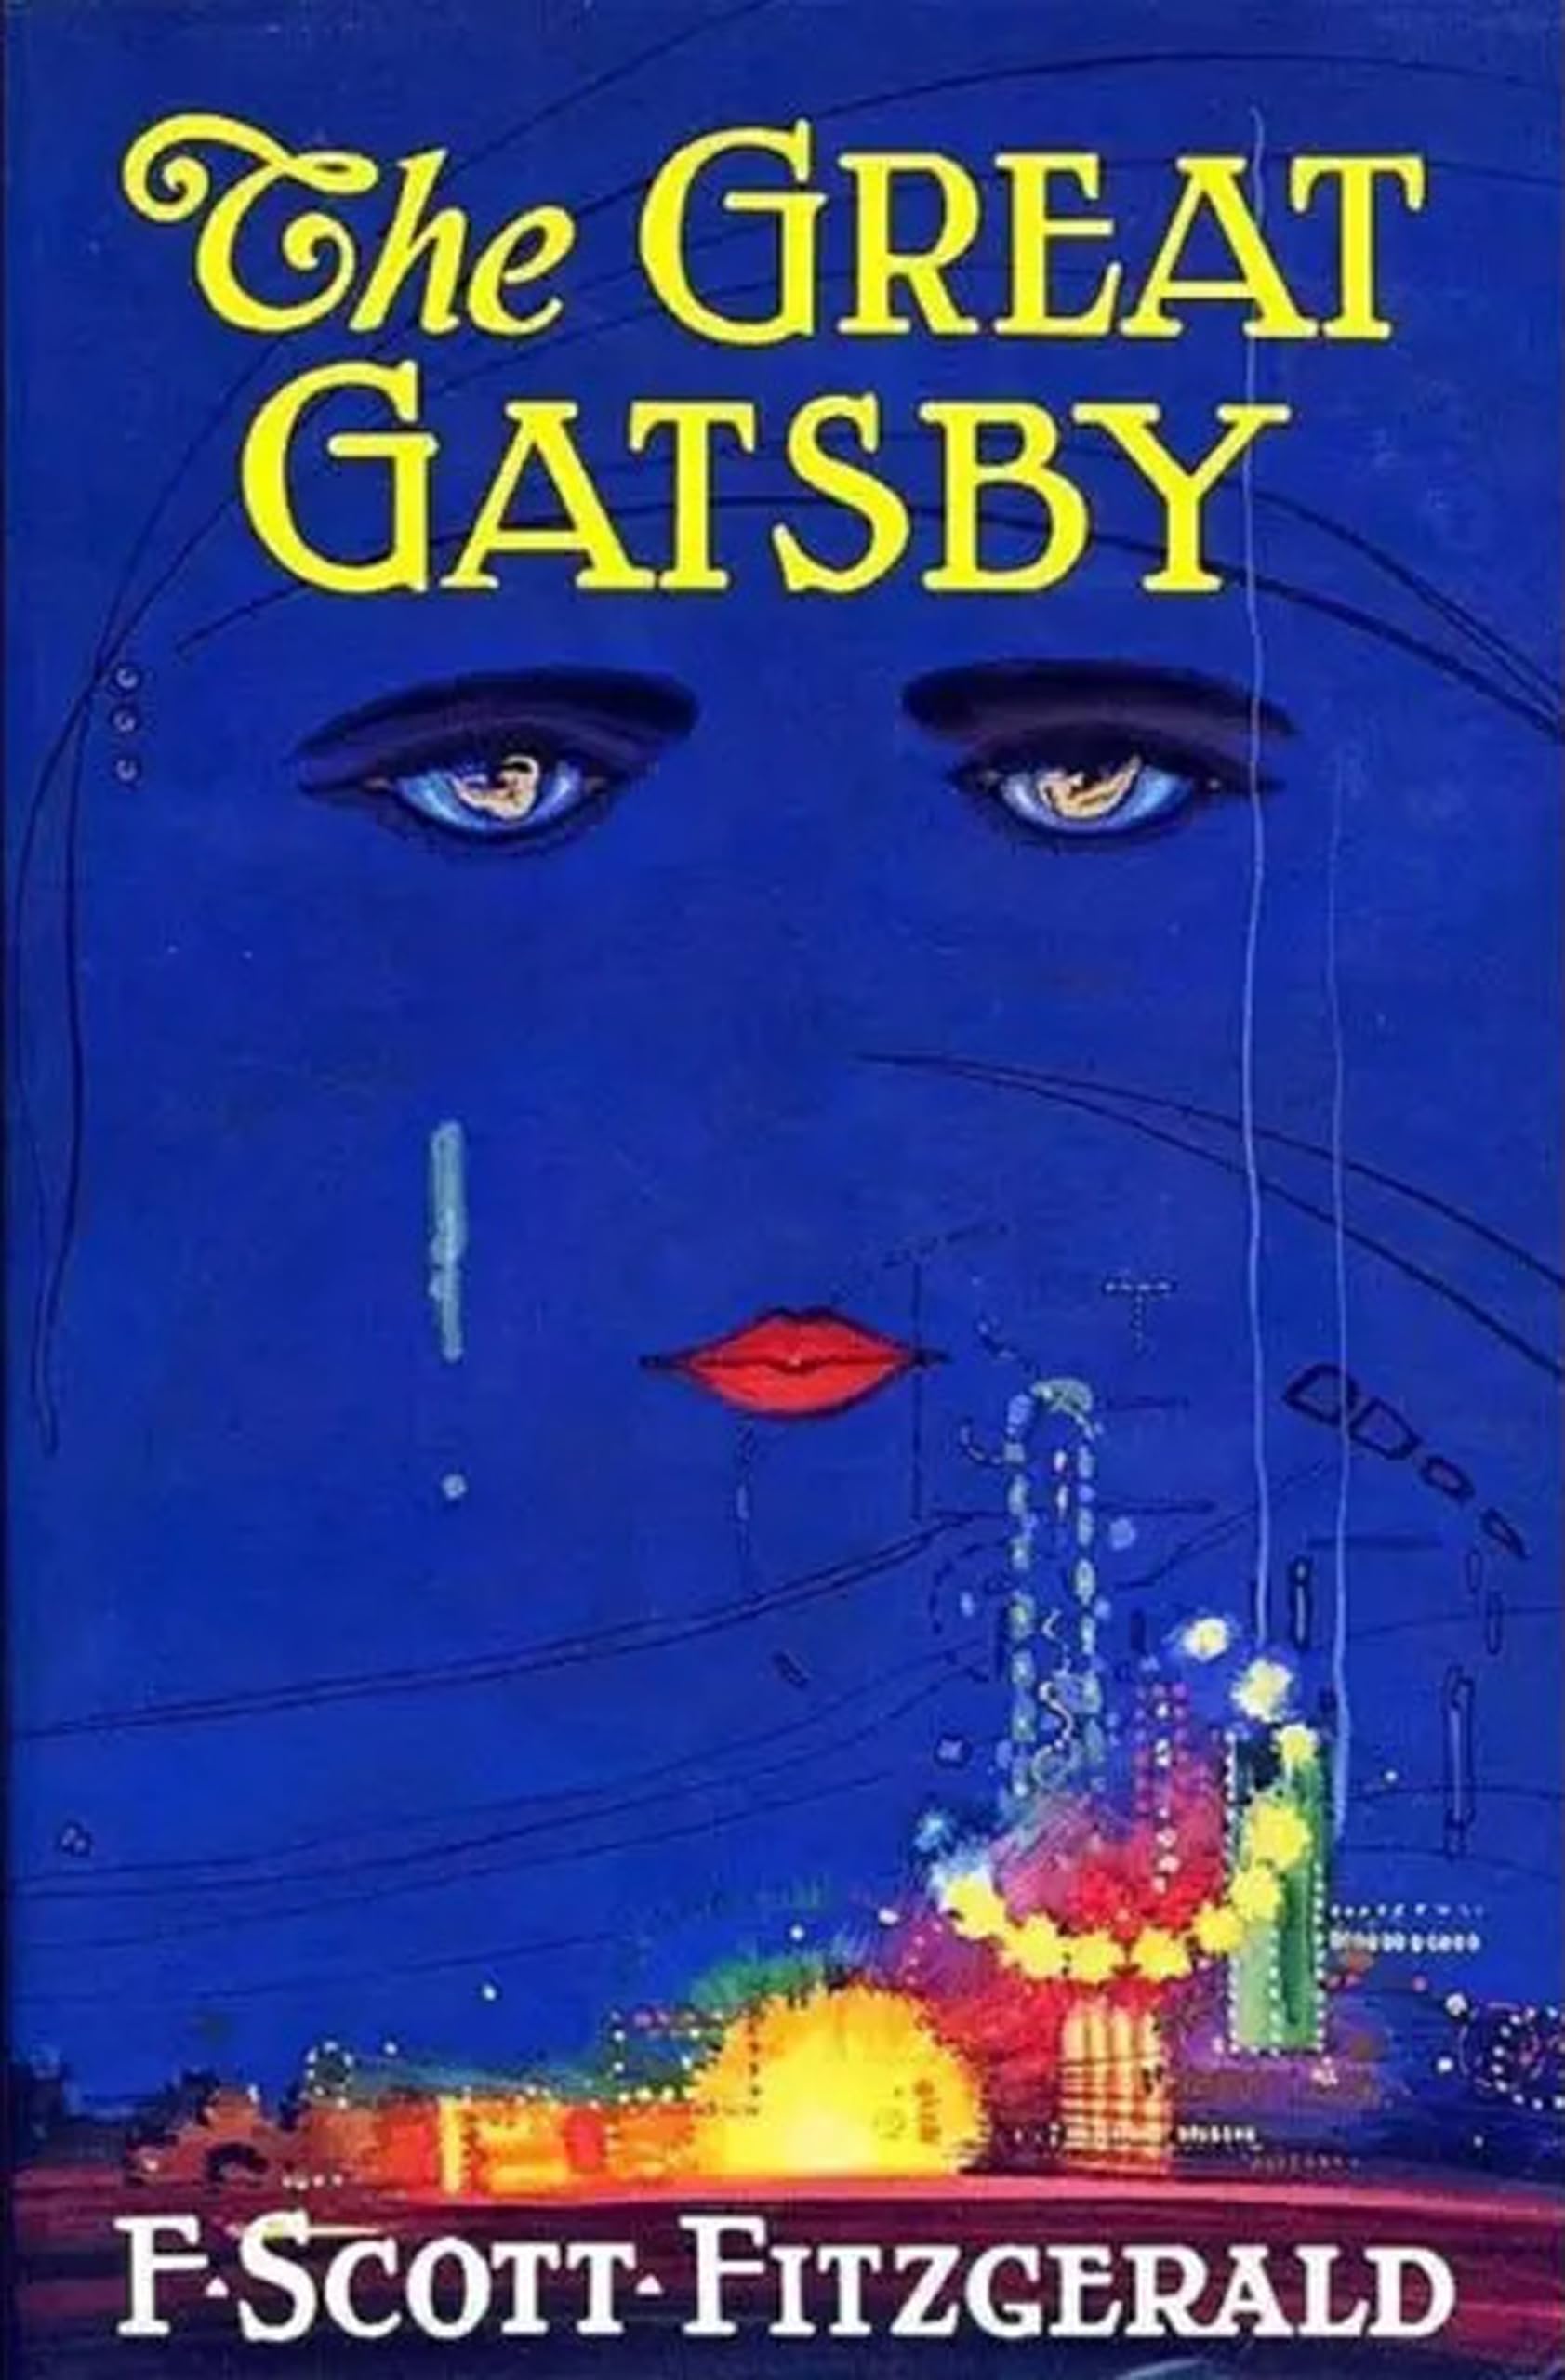 The Great Gatsby: Original 1925 Edition. FREE KINDLE EDITION